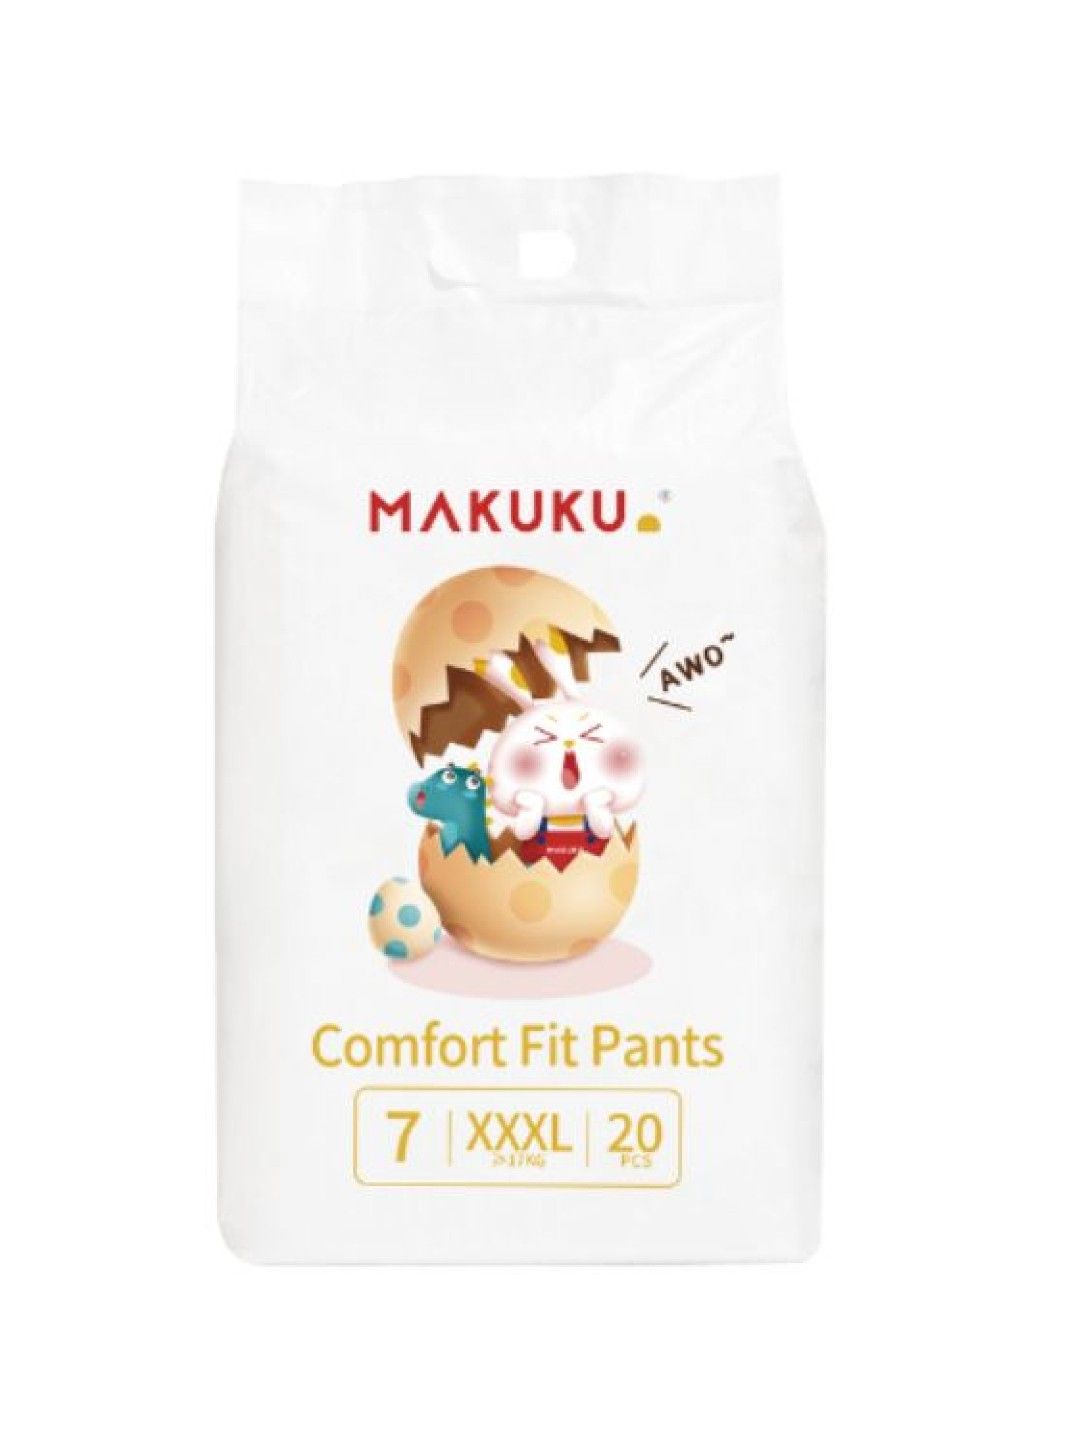 Makuku Baby Soft and Breathable Comfort Fit Diaper Pants, XXXLarge (20s)